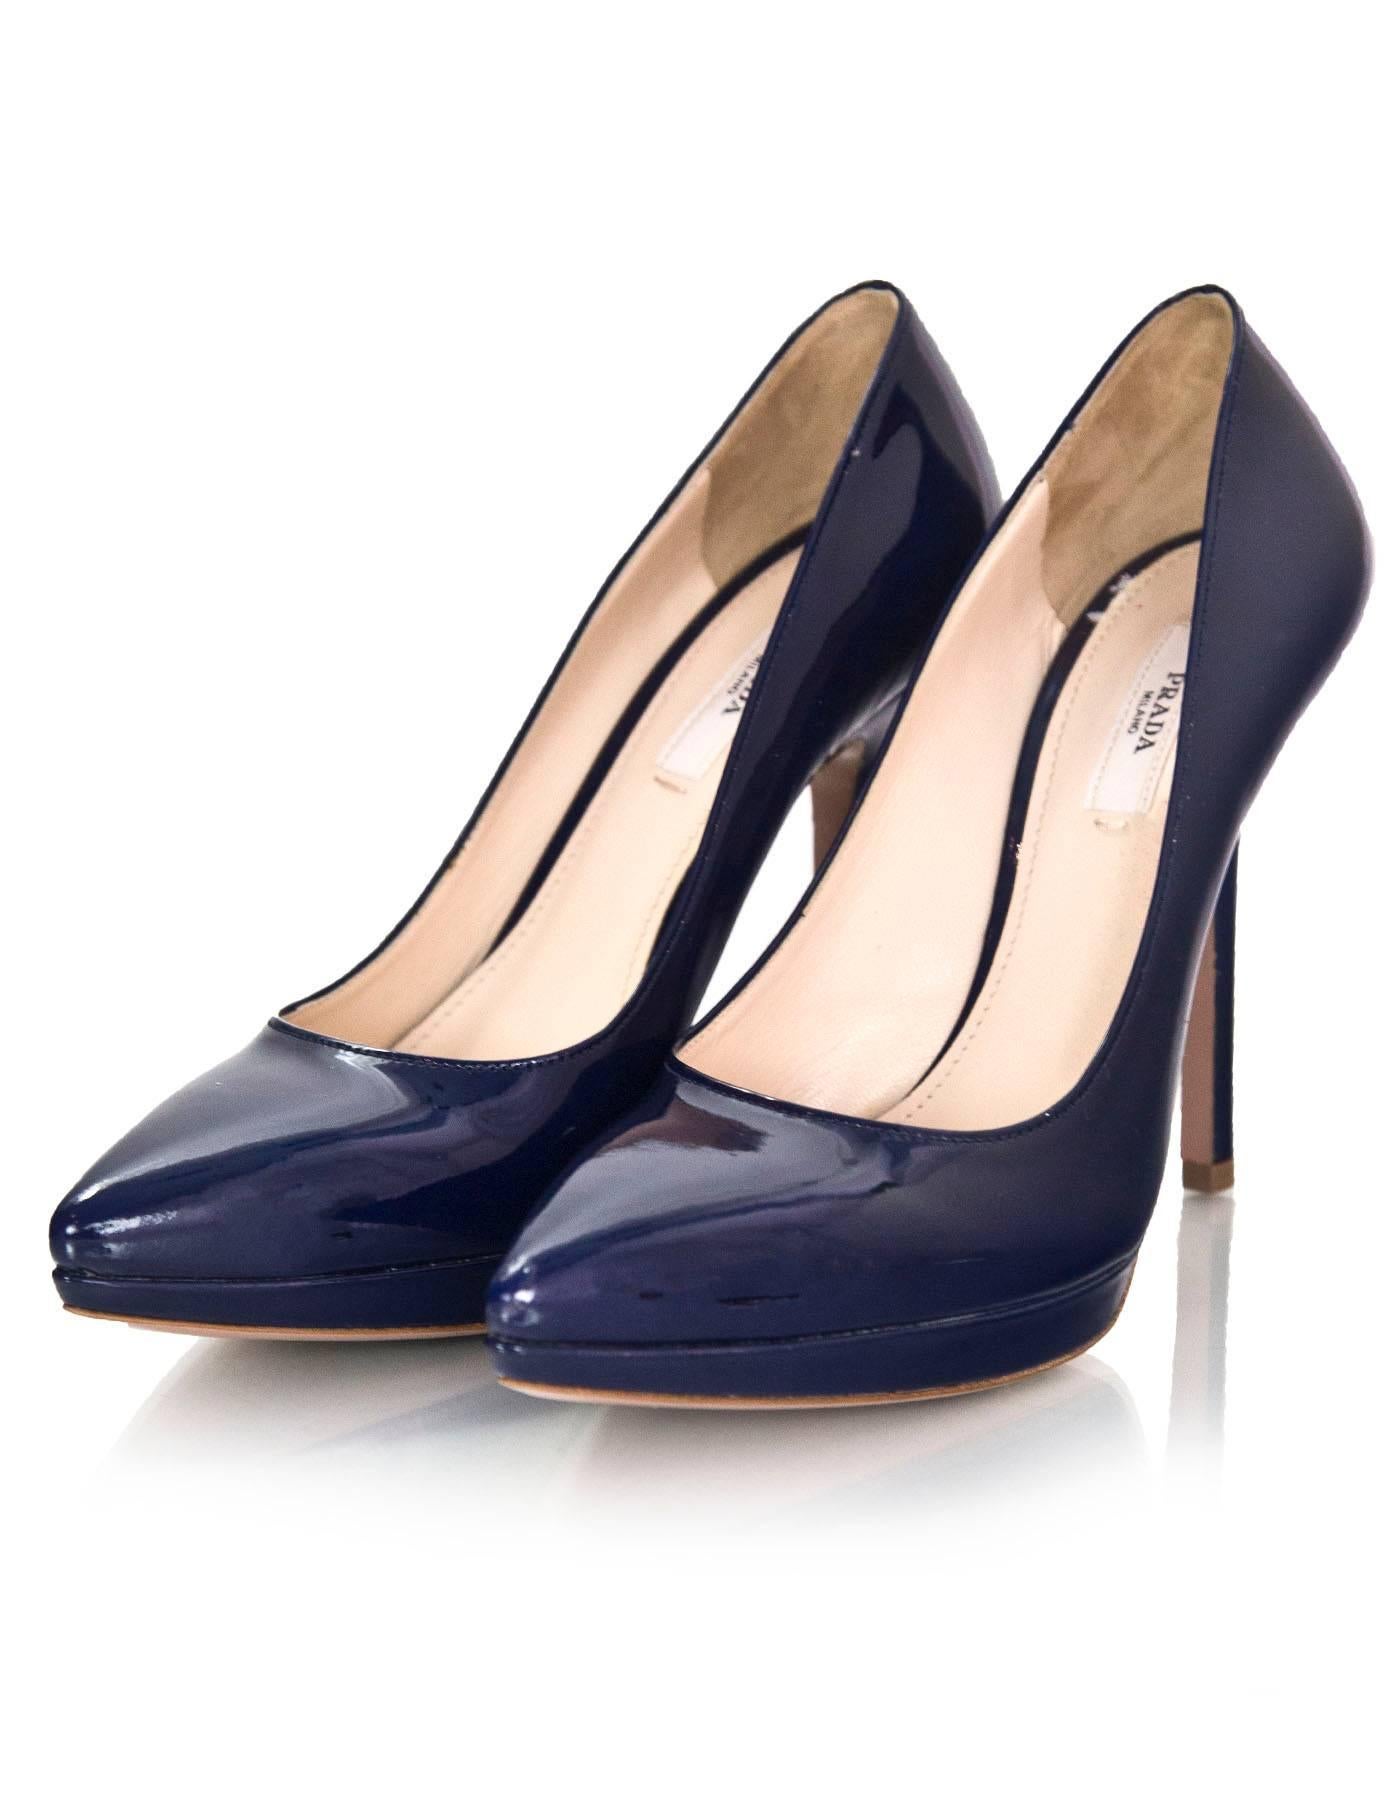 Prada Navy Patent Leather Vernice Donna Pumps Sz 37.5

Made In: Italy
Color: Navy
Materials: Patent leather
Closure/Opening: Slide on
Sole Stamp: Prada 37.5 Made in Italy
Overall Condition: Very good pre-owned condition with the exception of peeling